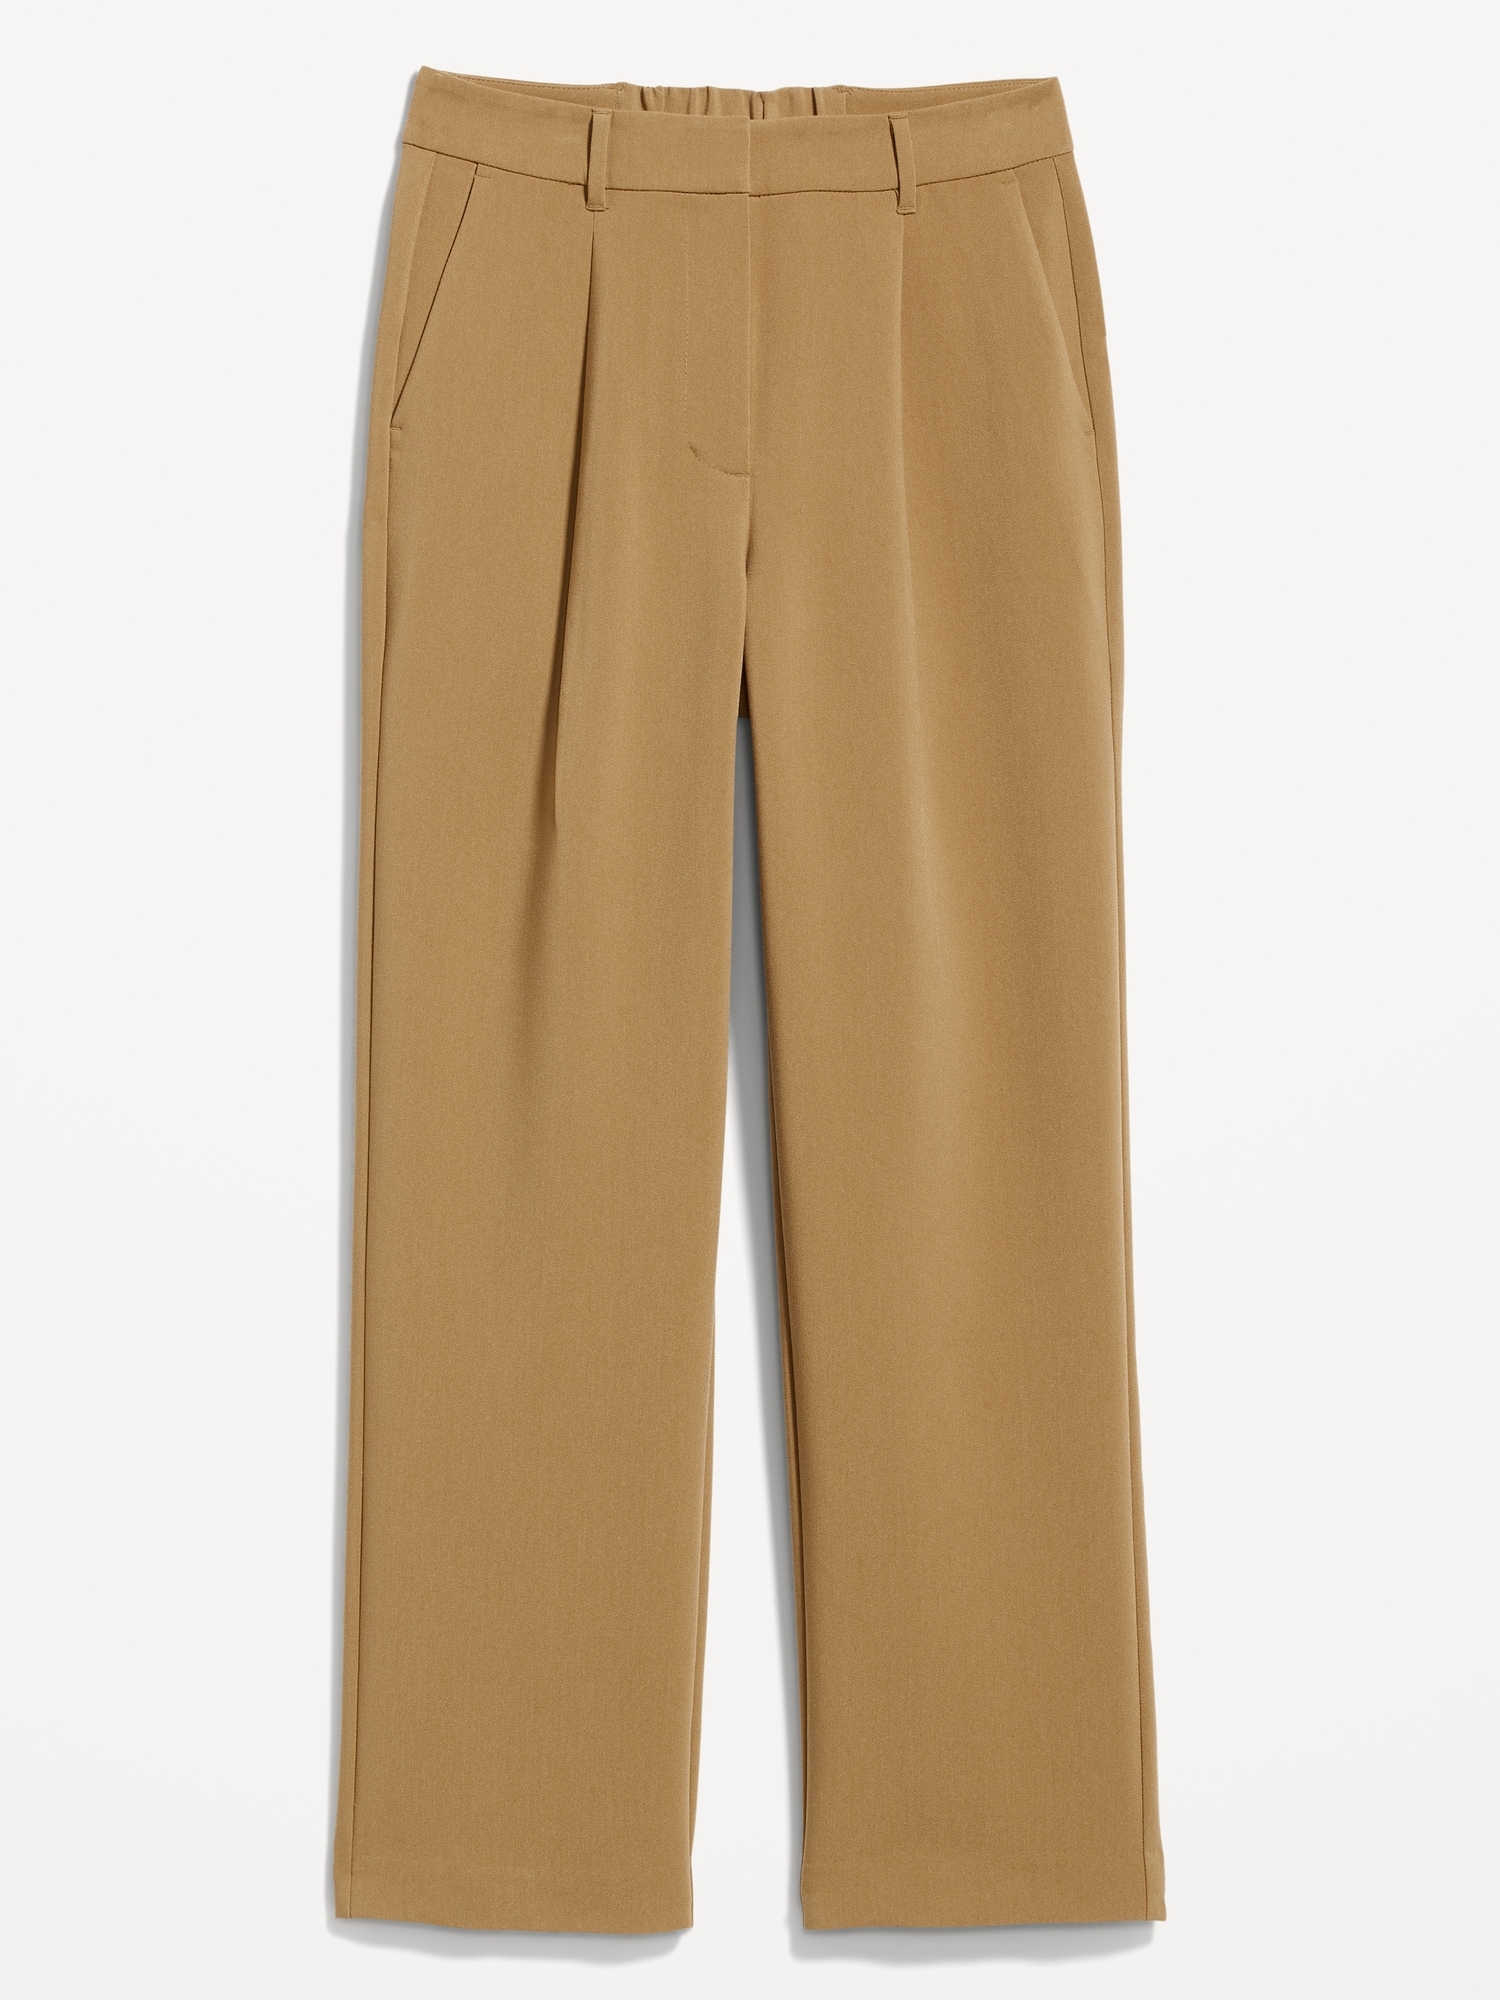 Never Miss Beige High-Waisted Wide-Leg Pleated Trouser Pants